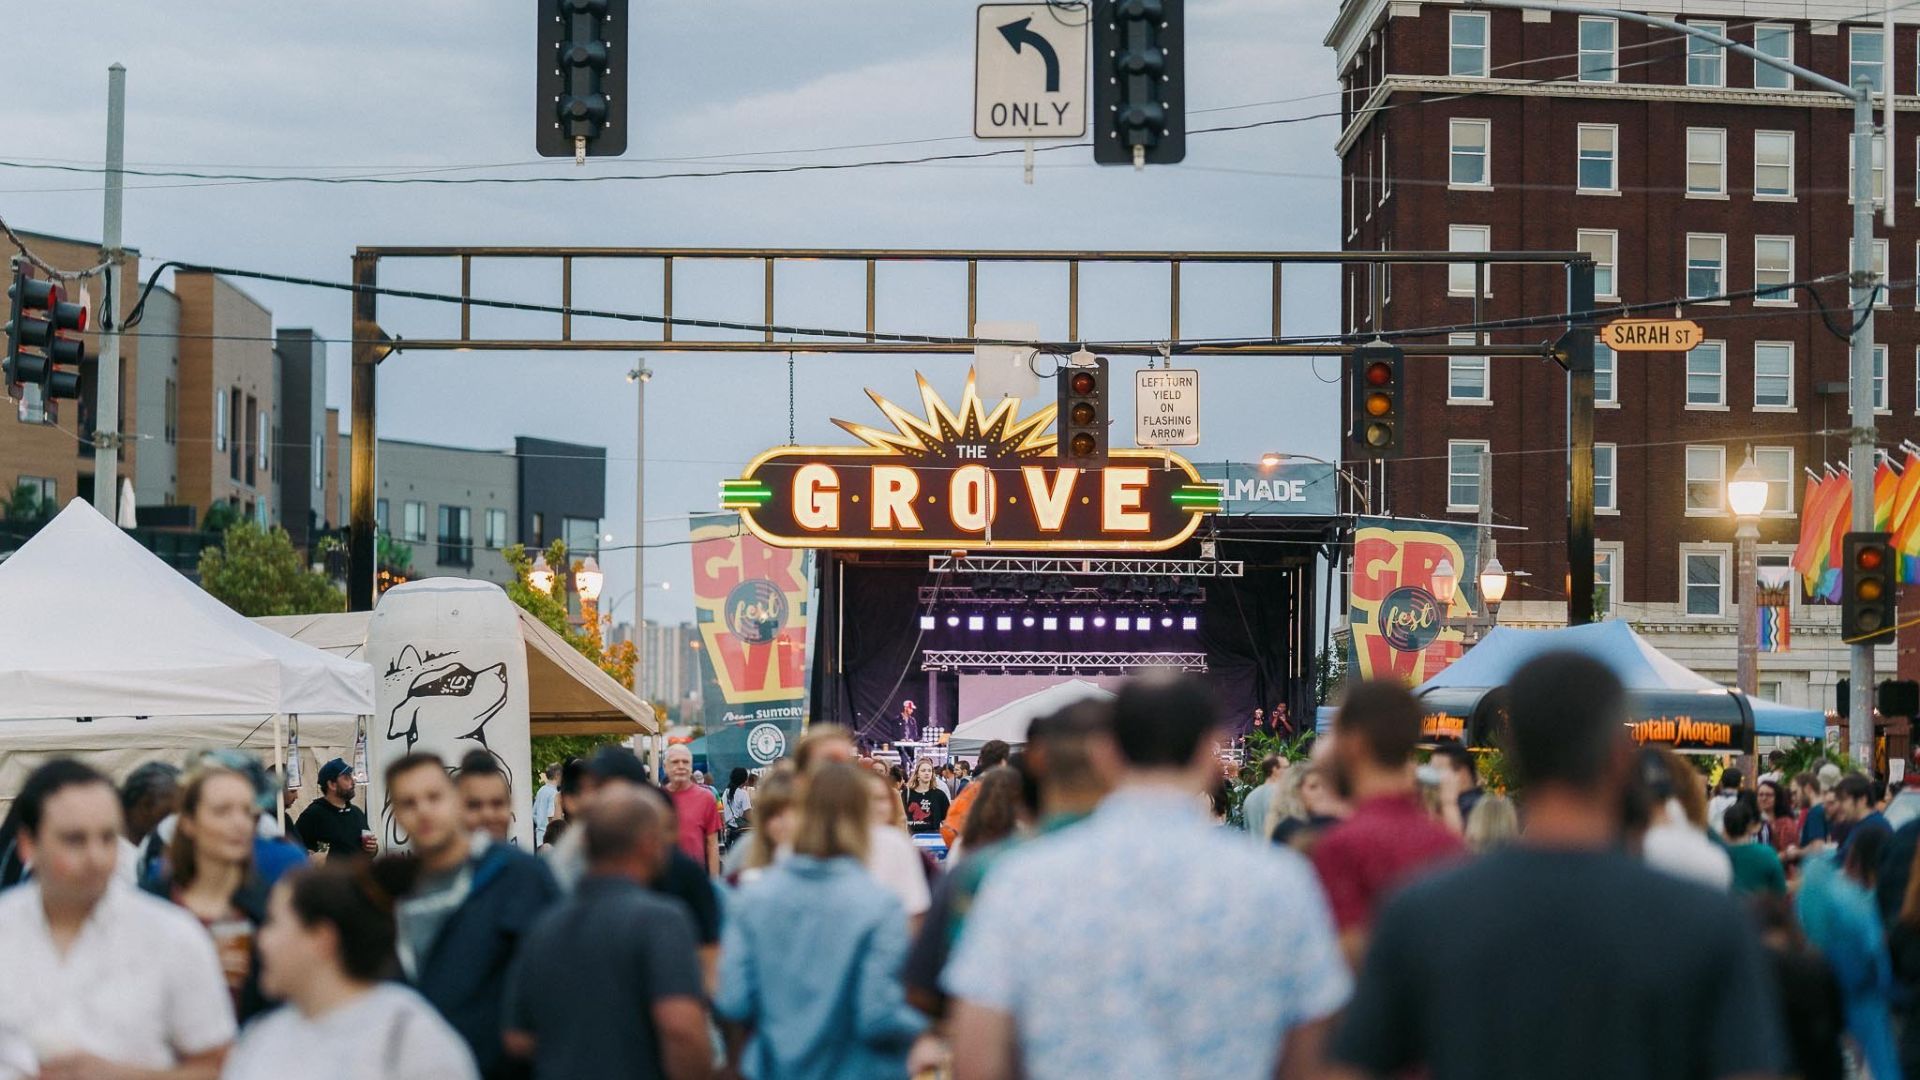 Crowds swarm the streets of The Grove neighborhood in St. Louis for GroveFest.